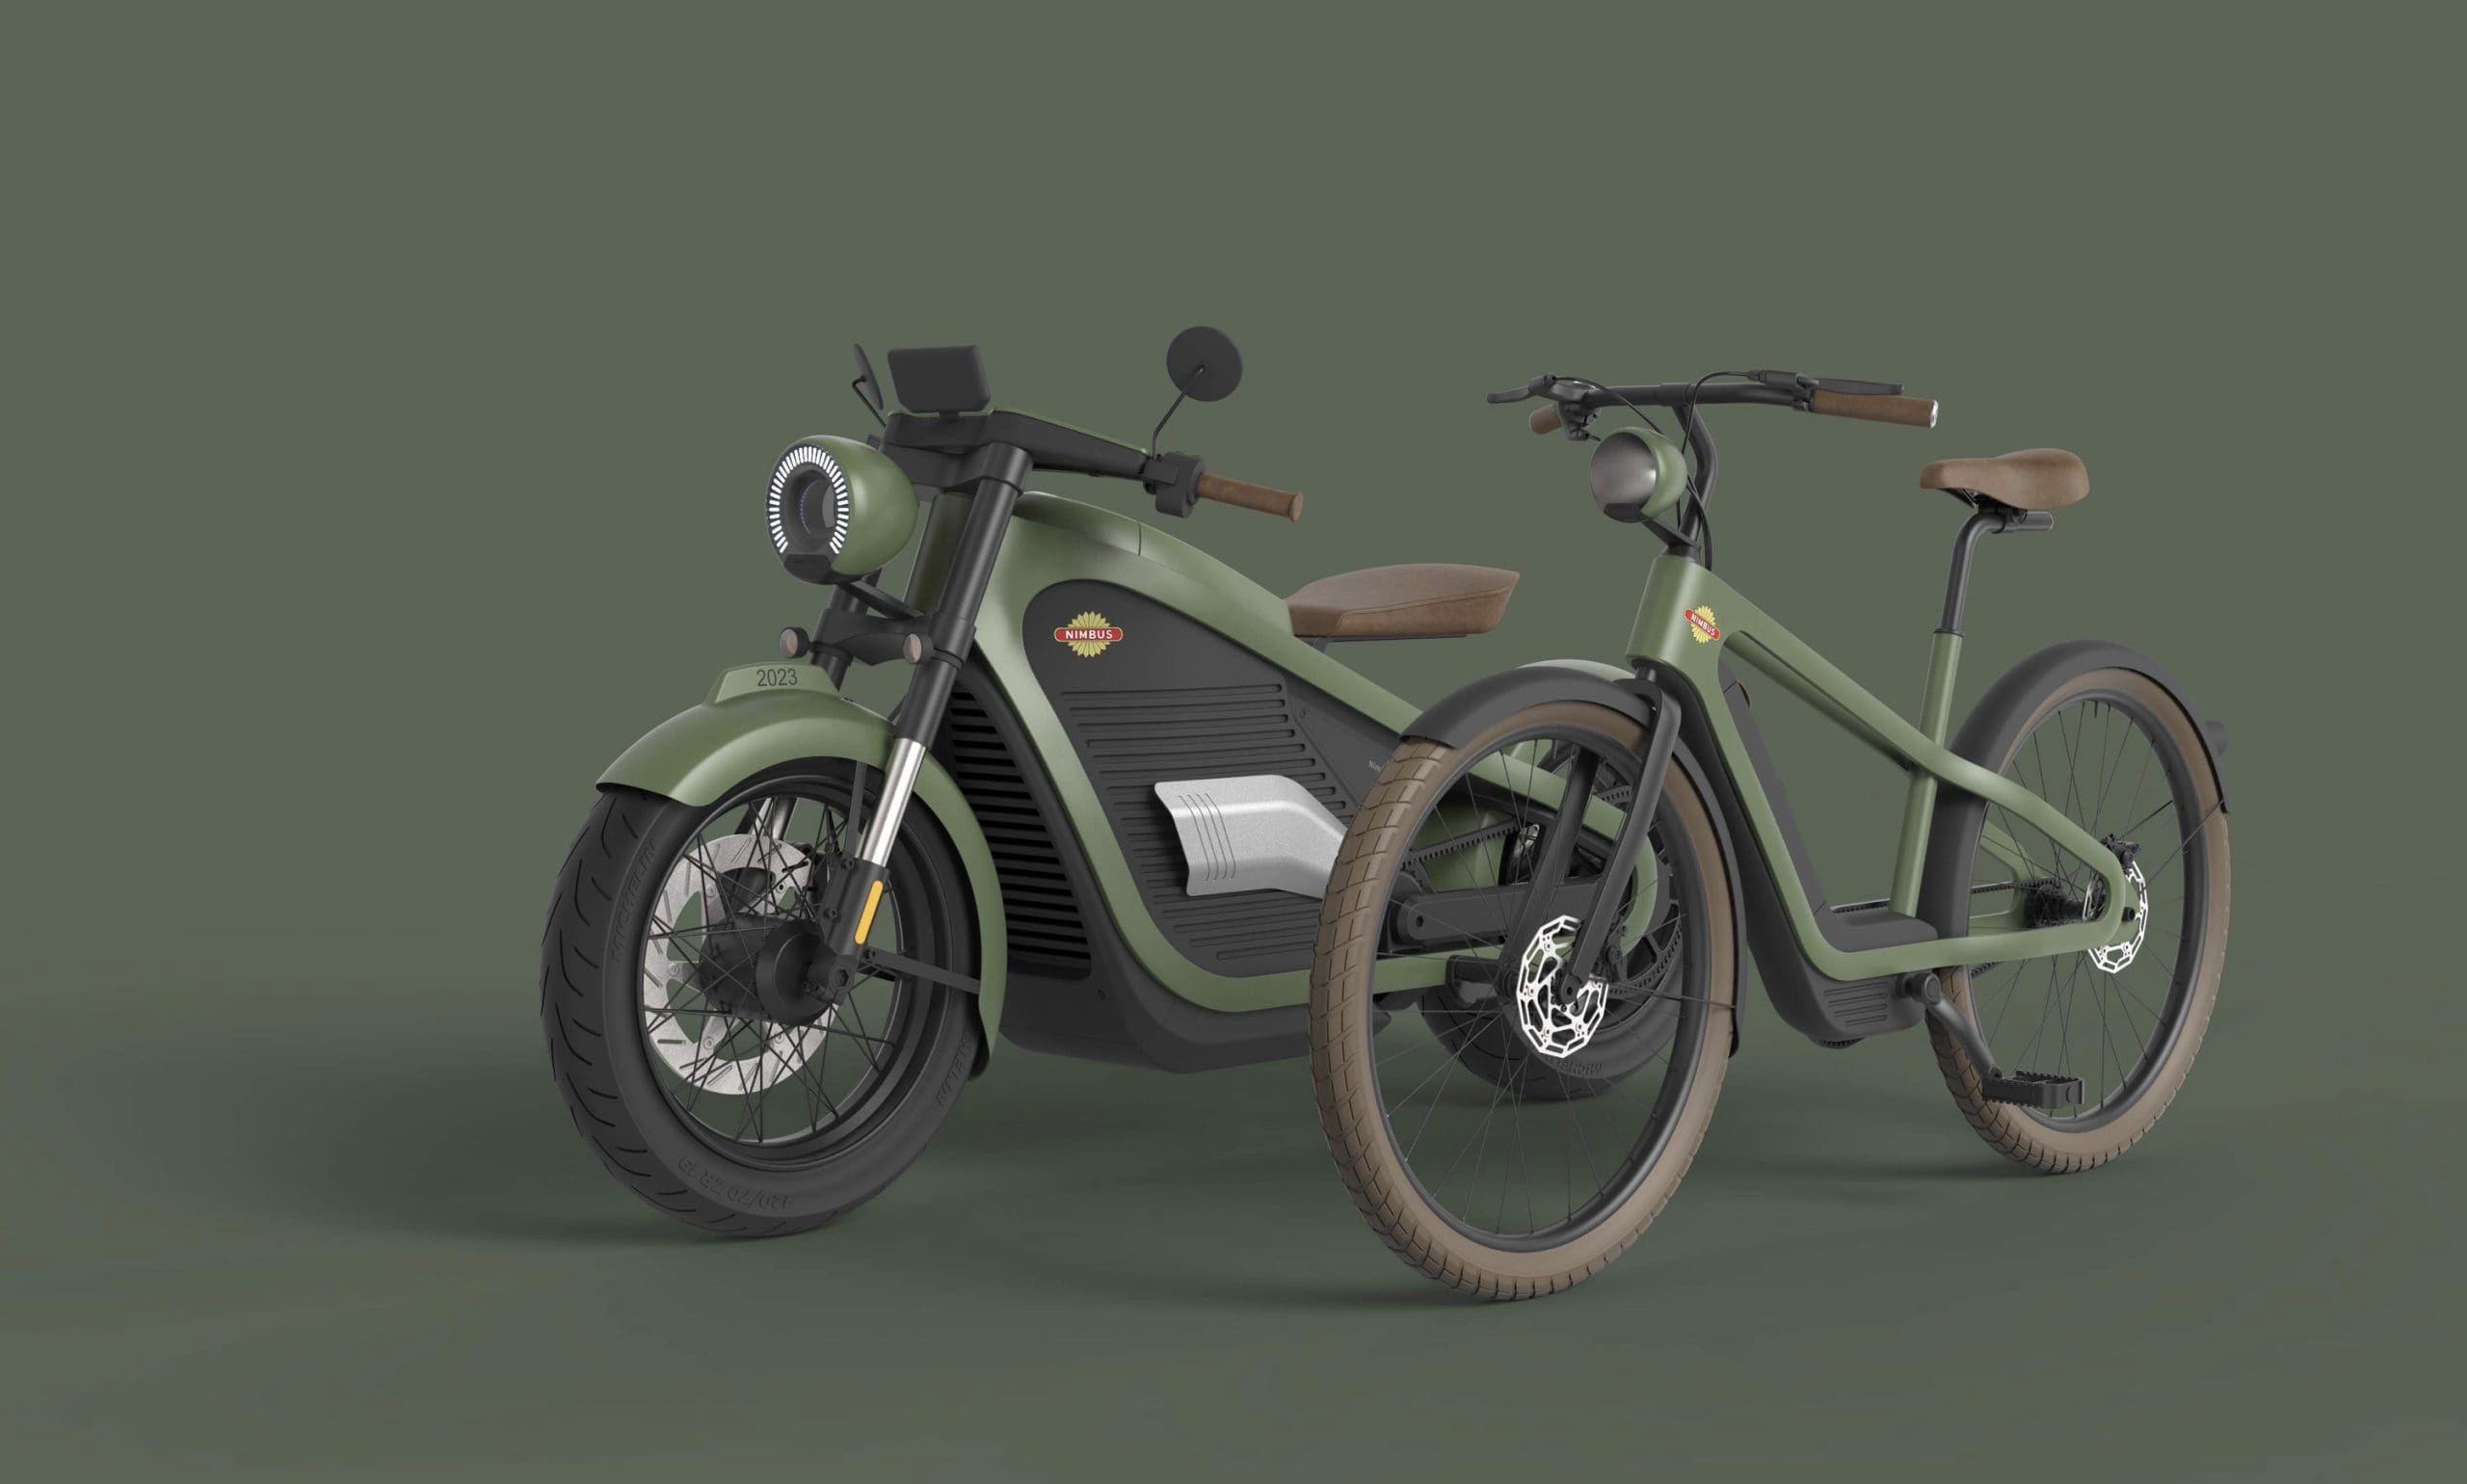 A view of Nimbus Motorcycles' "One" next to their incubating electric bicycle. Media sourced from Nimbus.